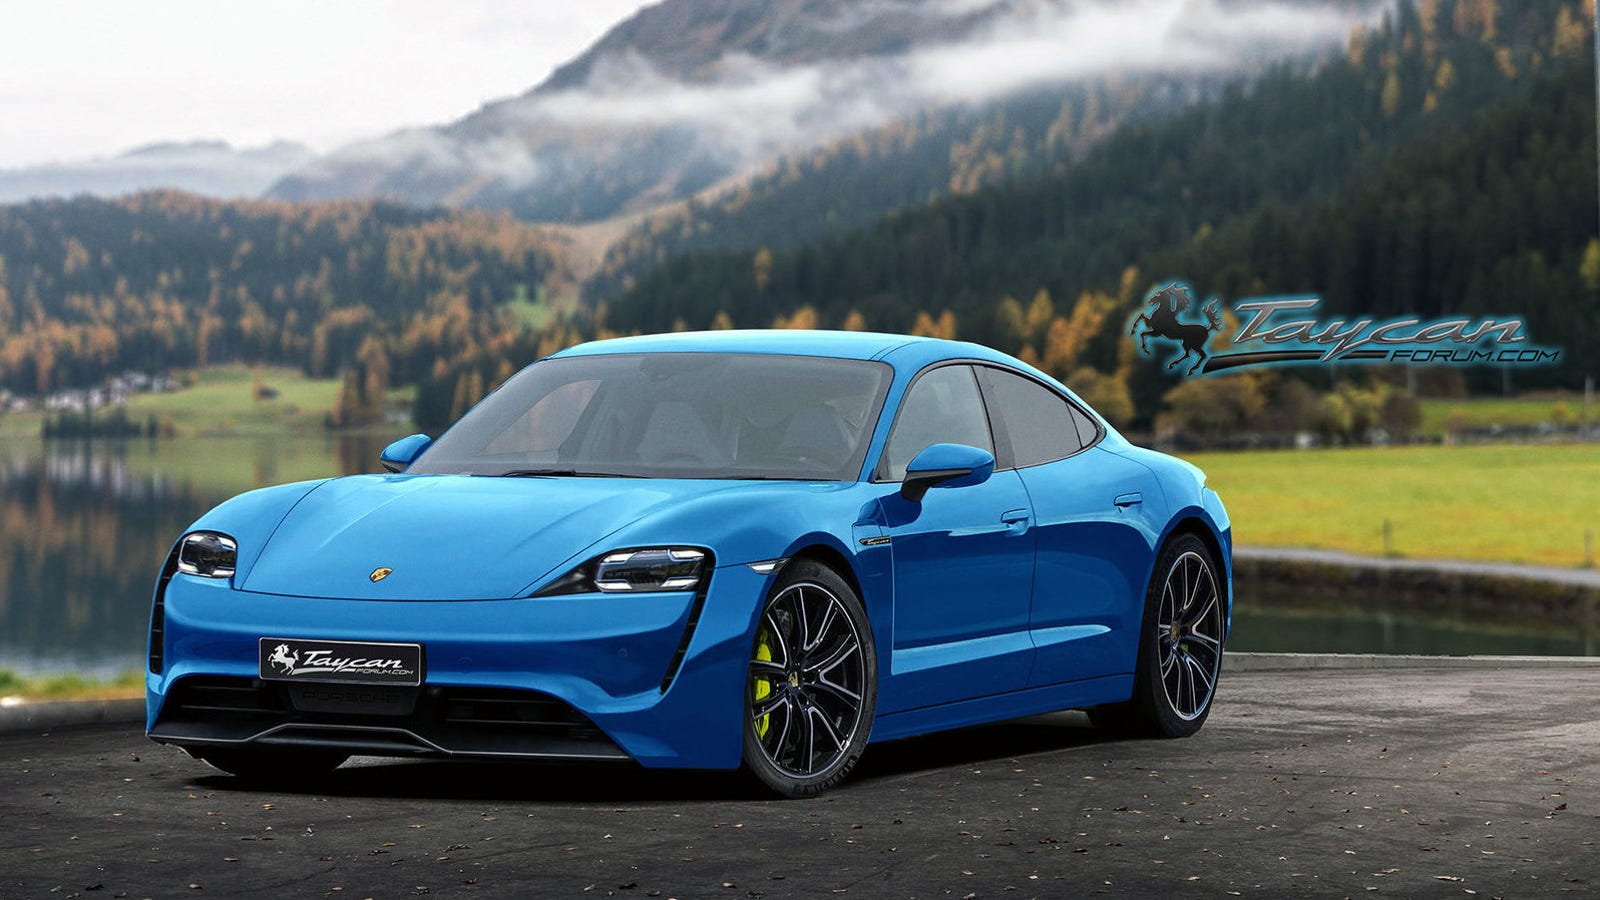 Here's What the Production Porsche Taycan Could Look Like